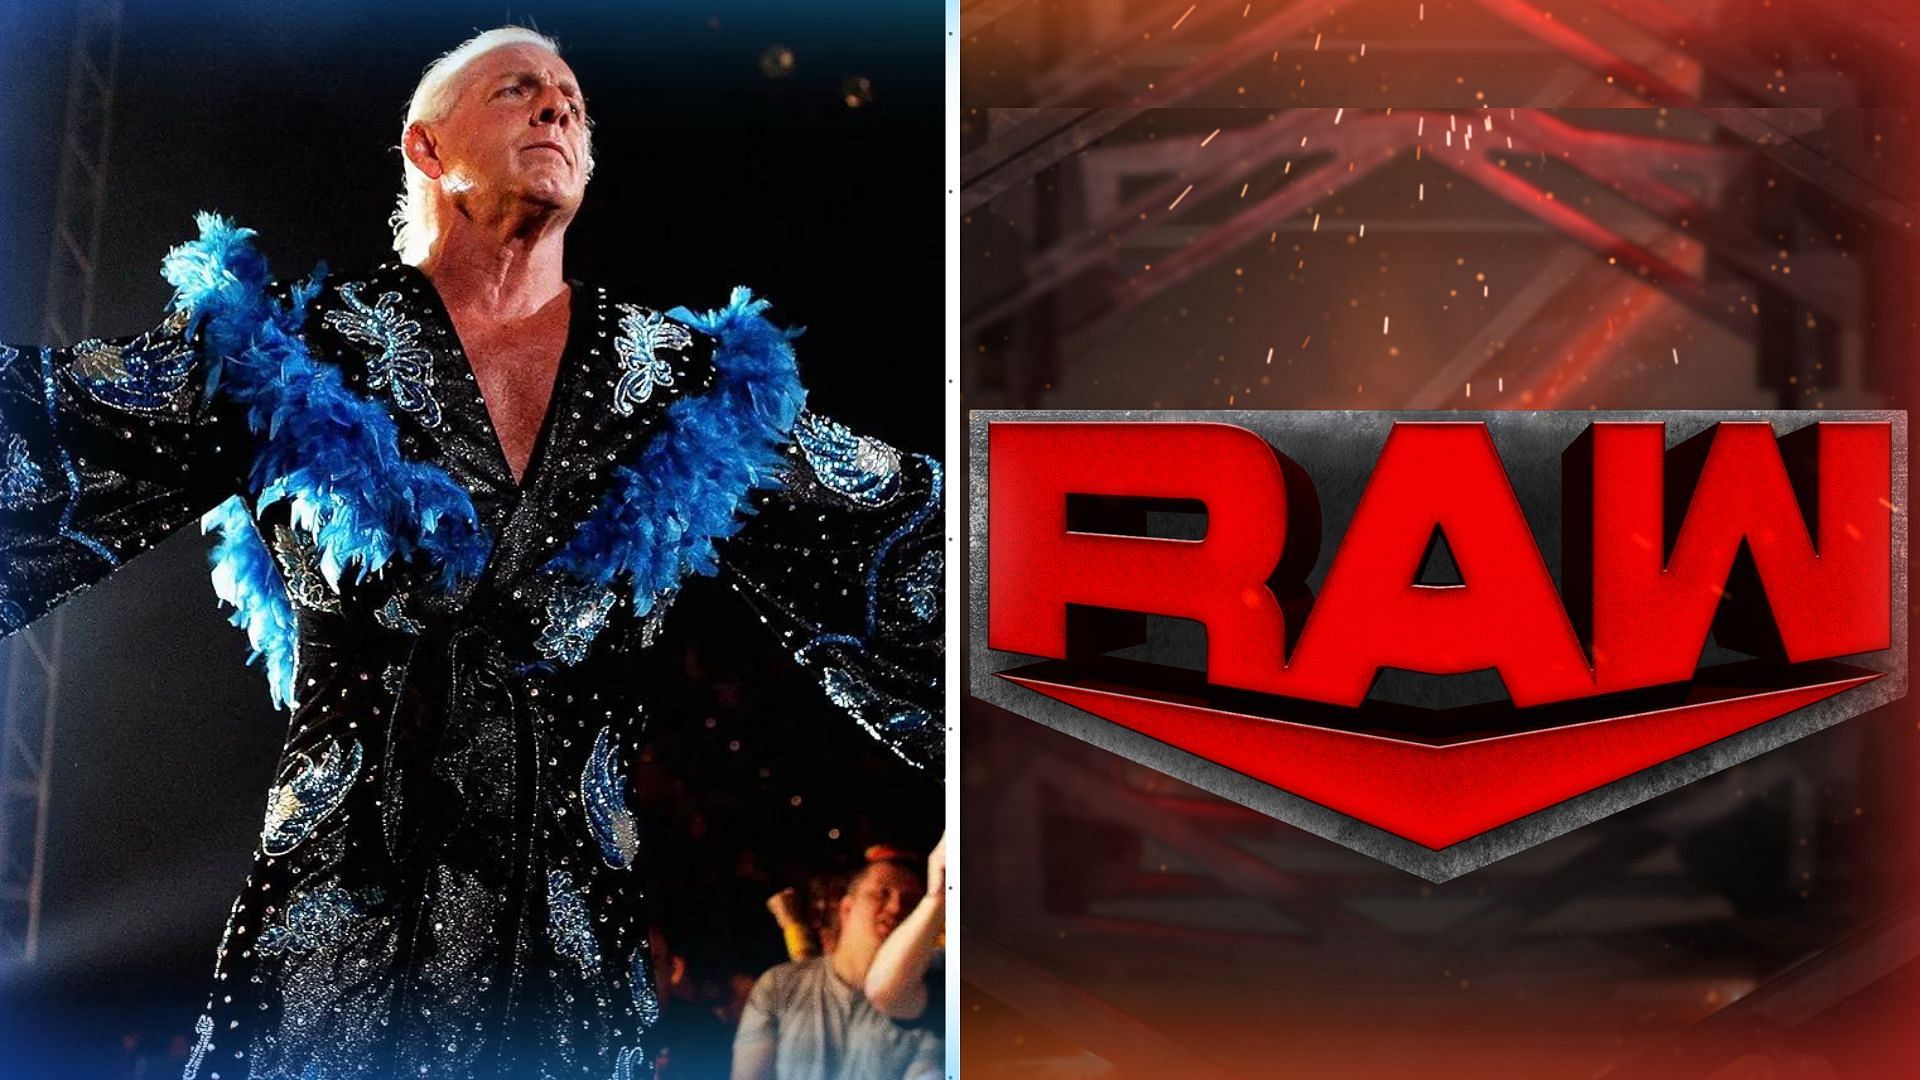 Ric Flair is a 16-time world champion and two-time Hall of Famer